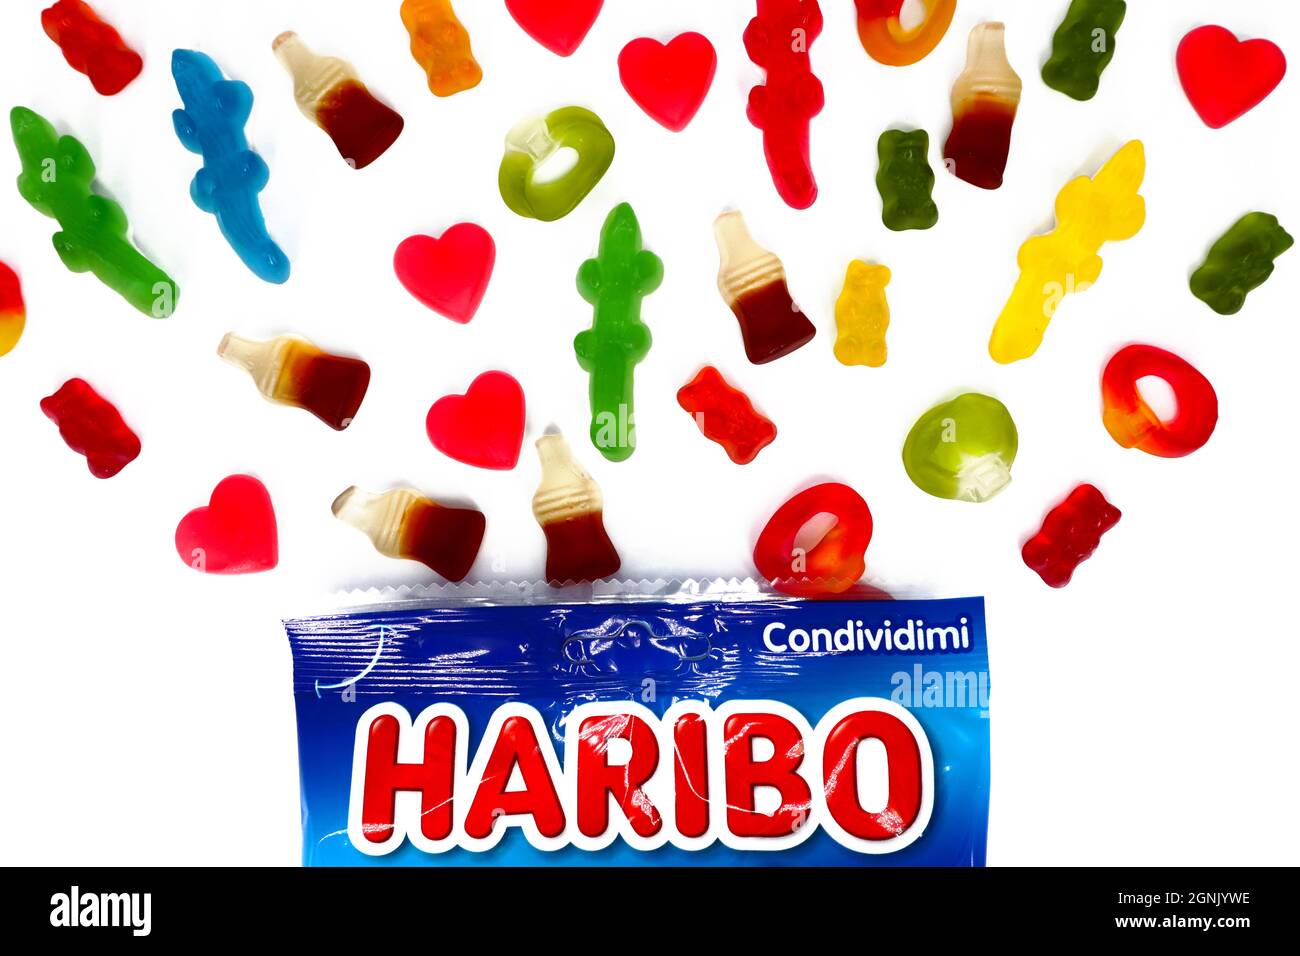 Haribo Candies package on white background. Haribo is a German Confectionery Company Stock Photo